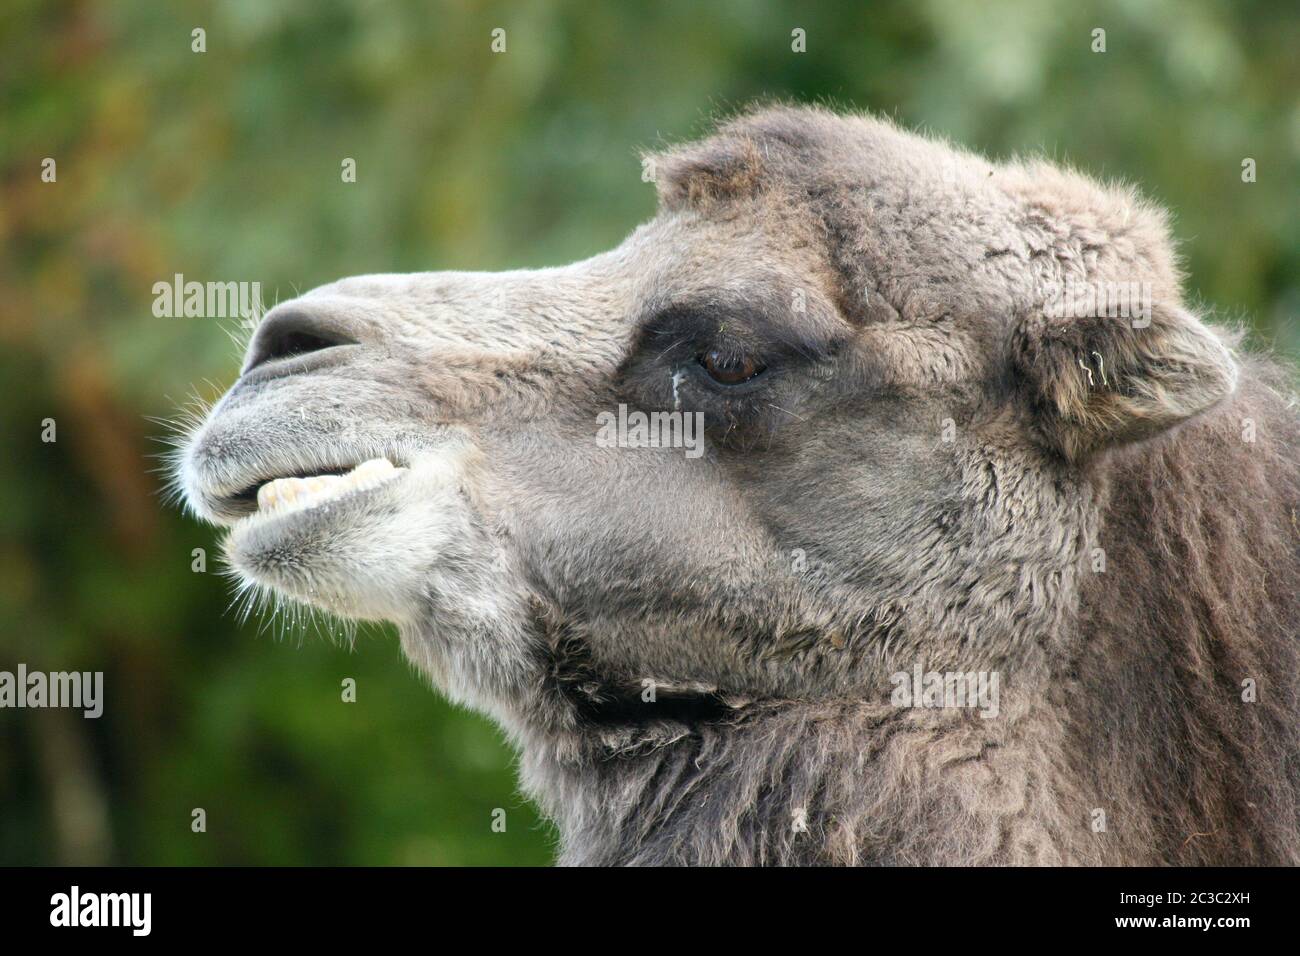 A camel portrait seen from the side Stock Photo